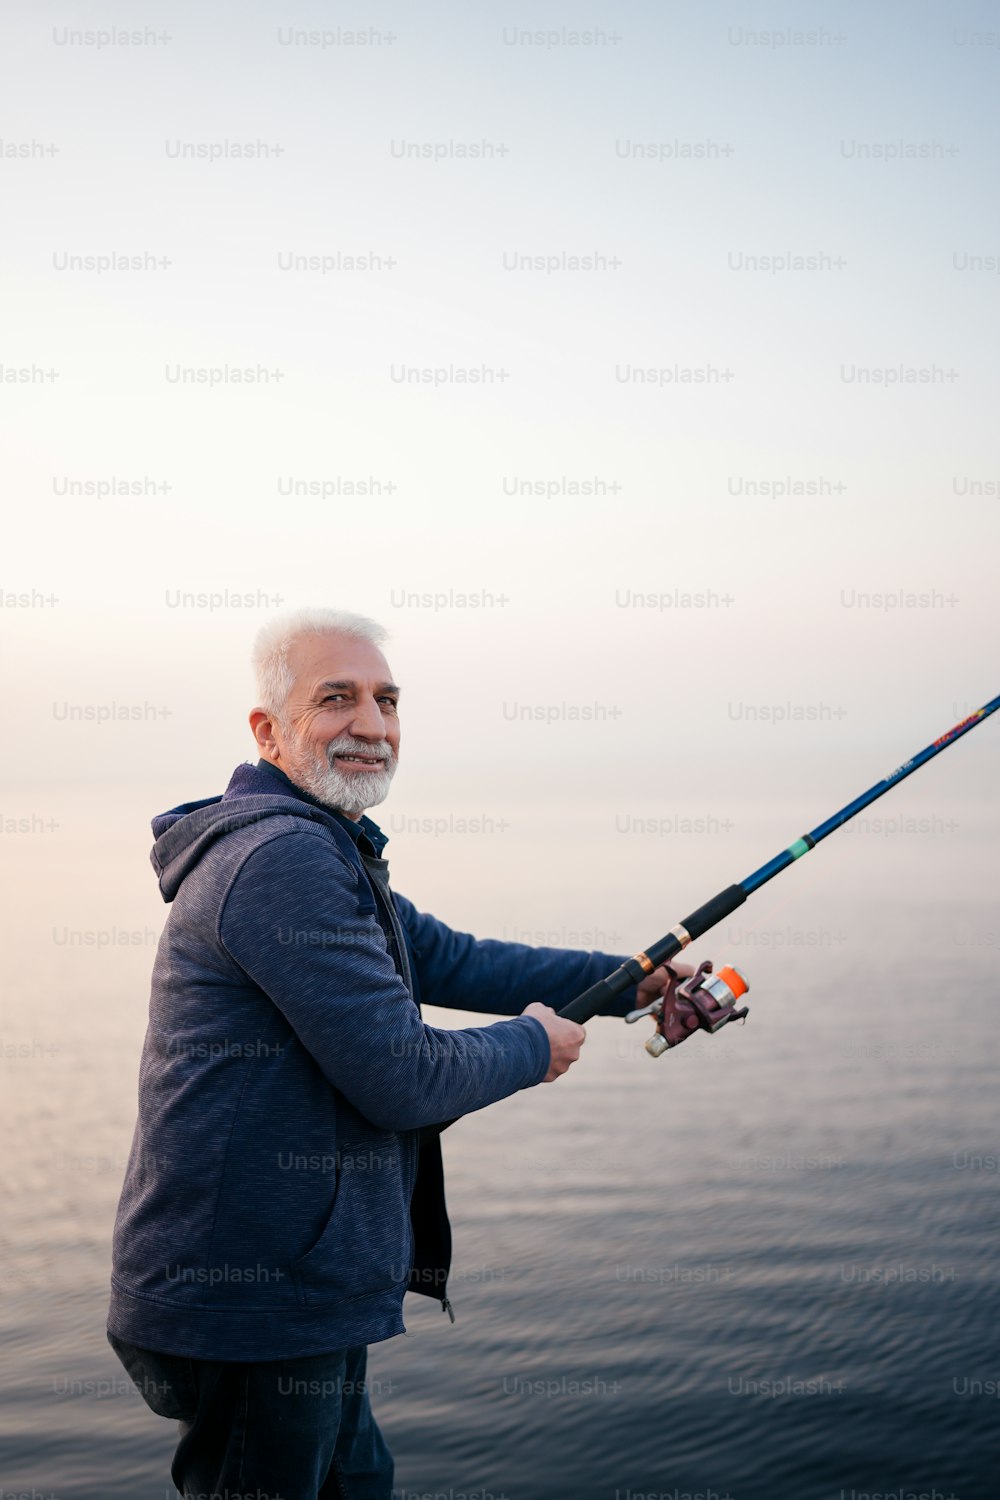 a man standing on a boat holding a fishing pole